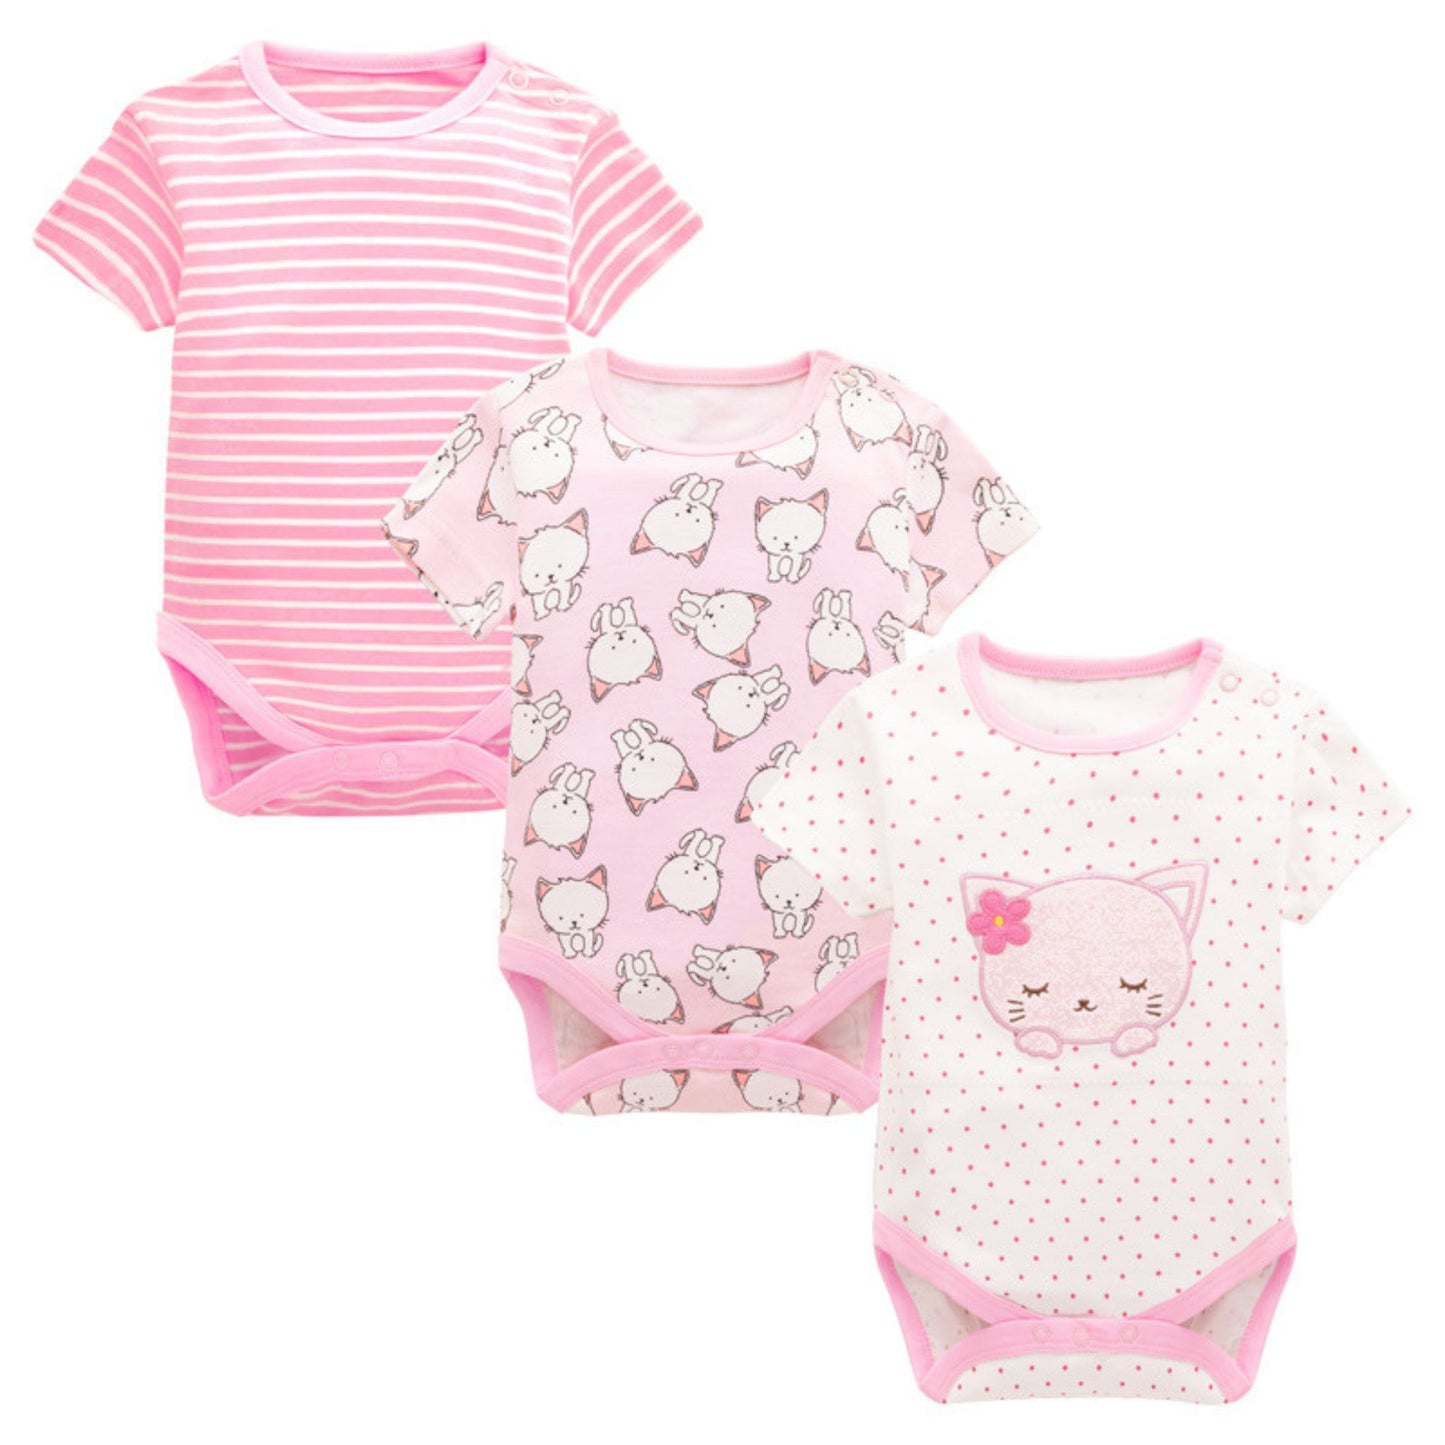 Purr-fectly AdorableBaby Girl Gift Set 3-6 Months